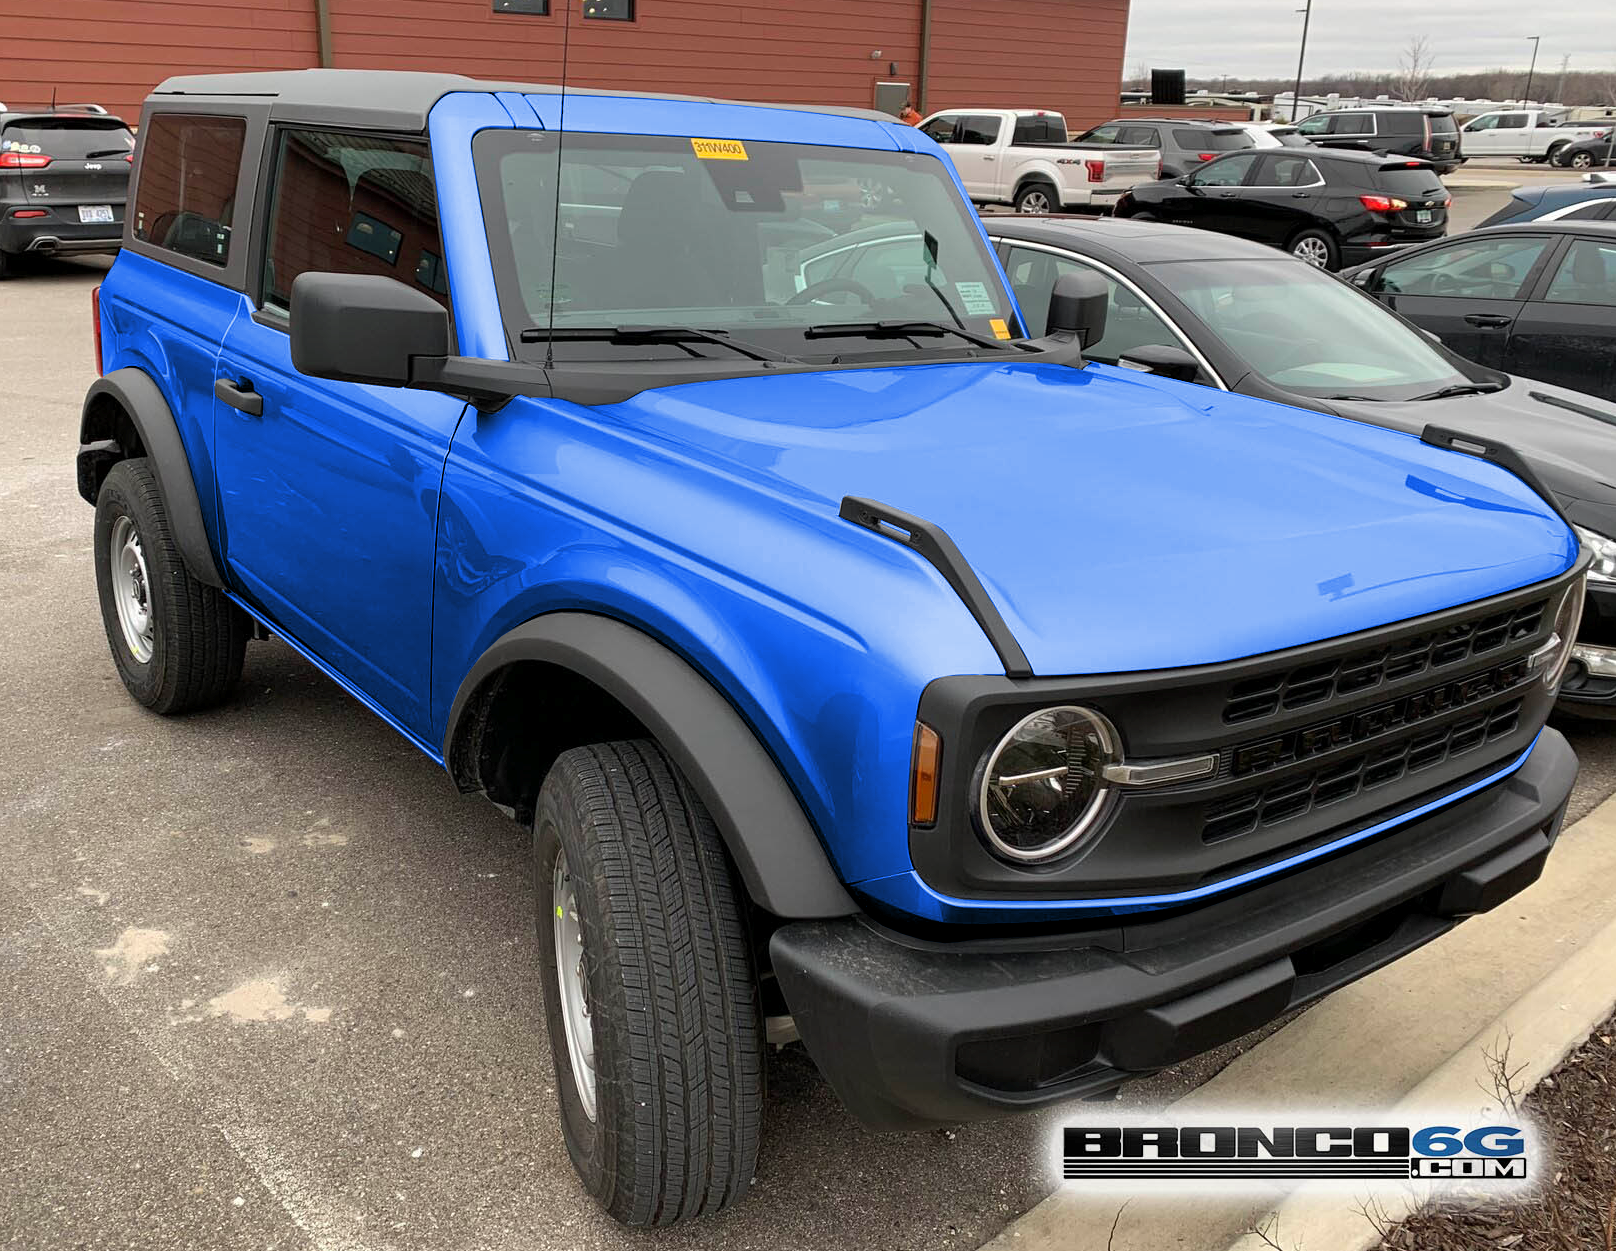 Ford Bronco Velocity Blue 2 Door - Render from actual photo - well, it’s a work in progress! 1608259869451